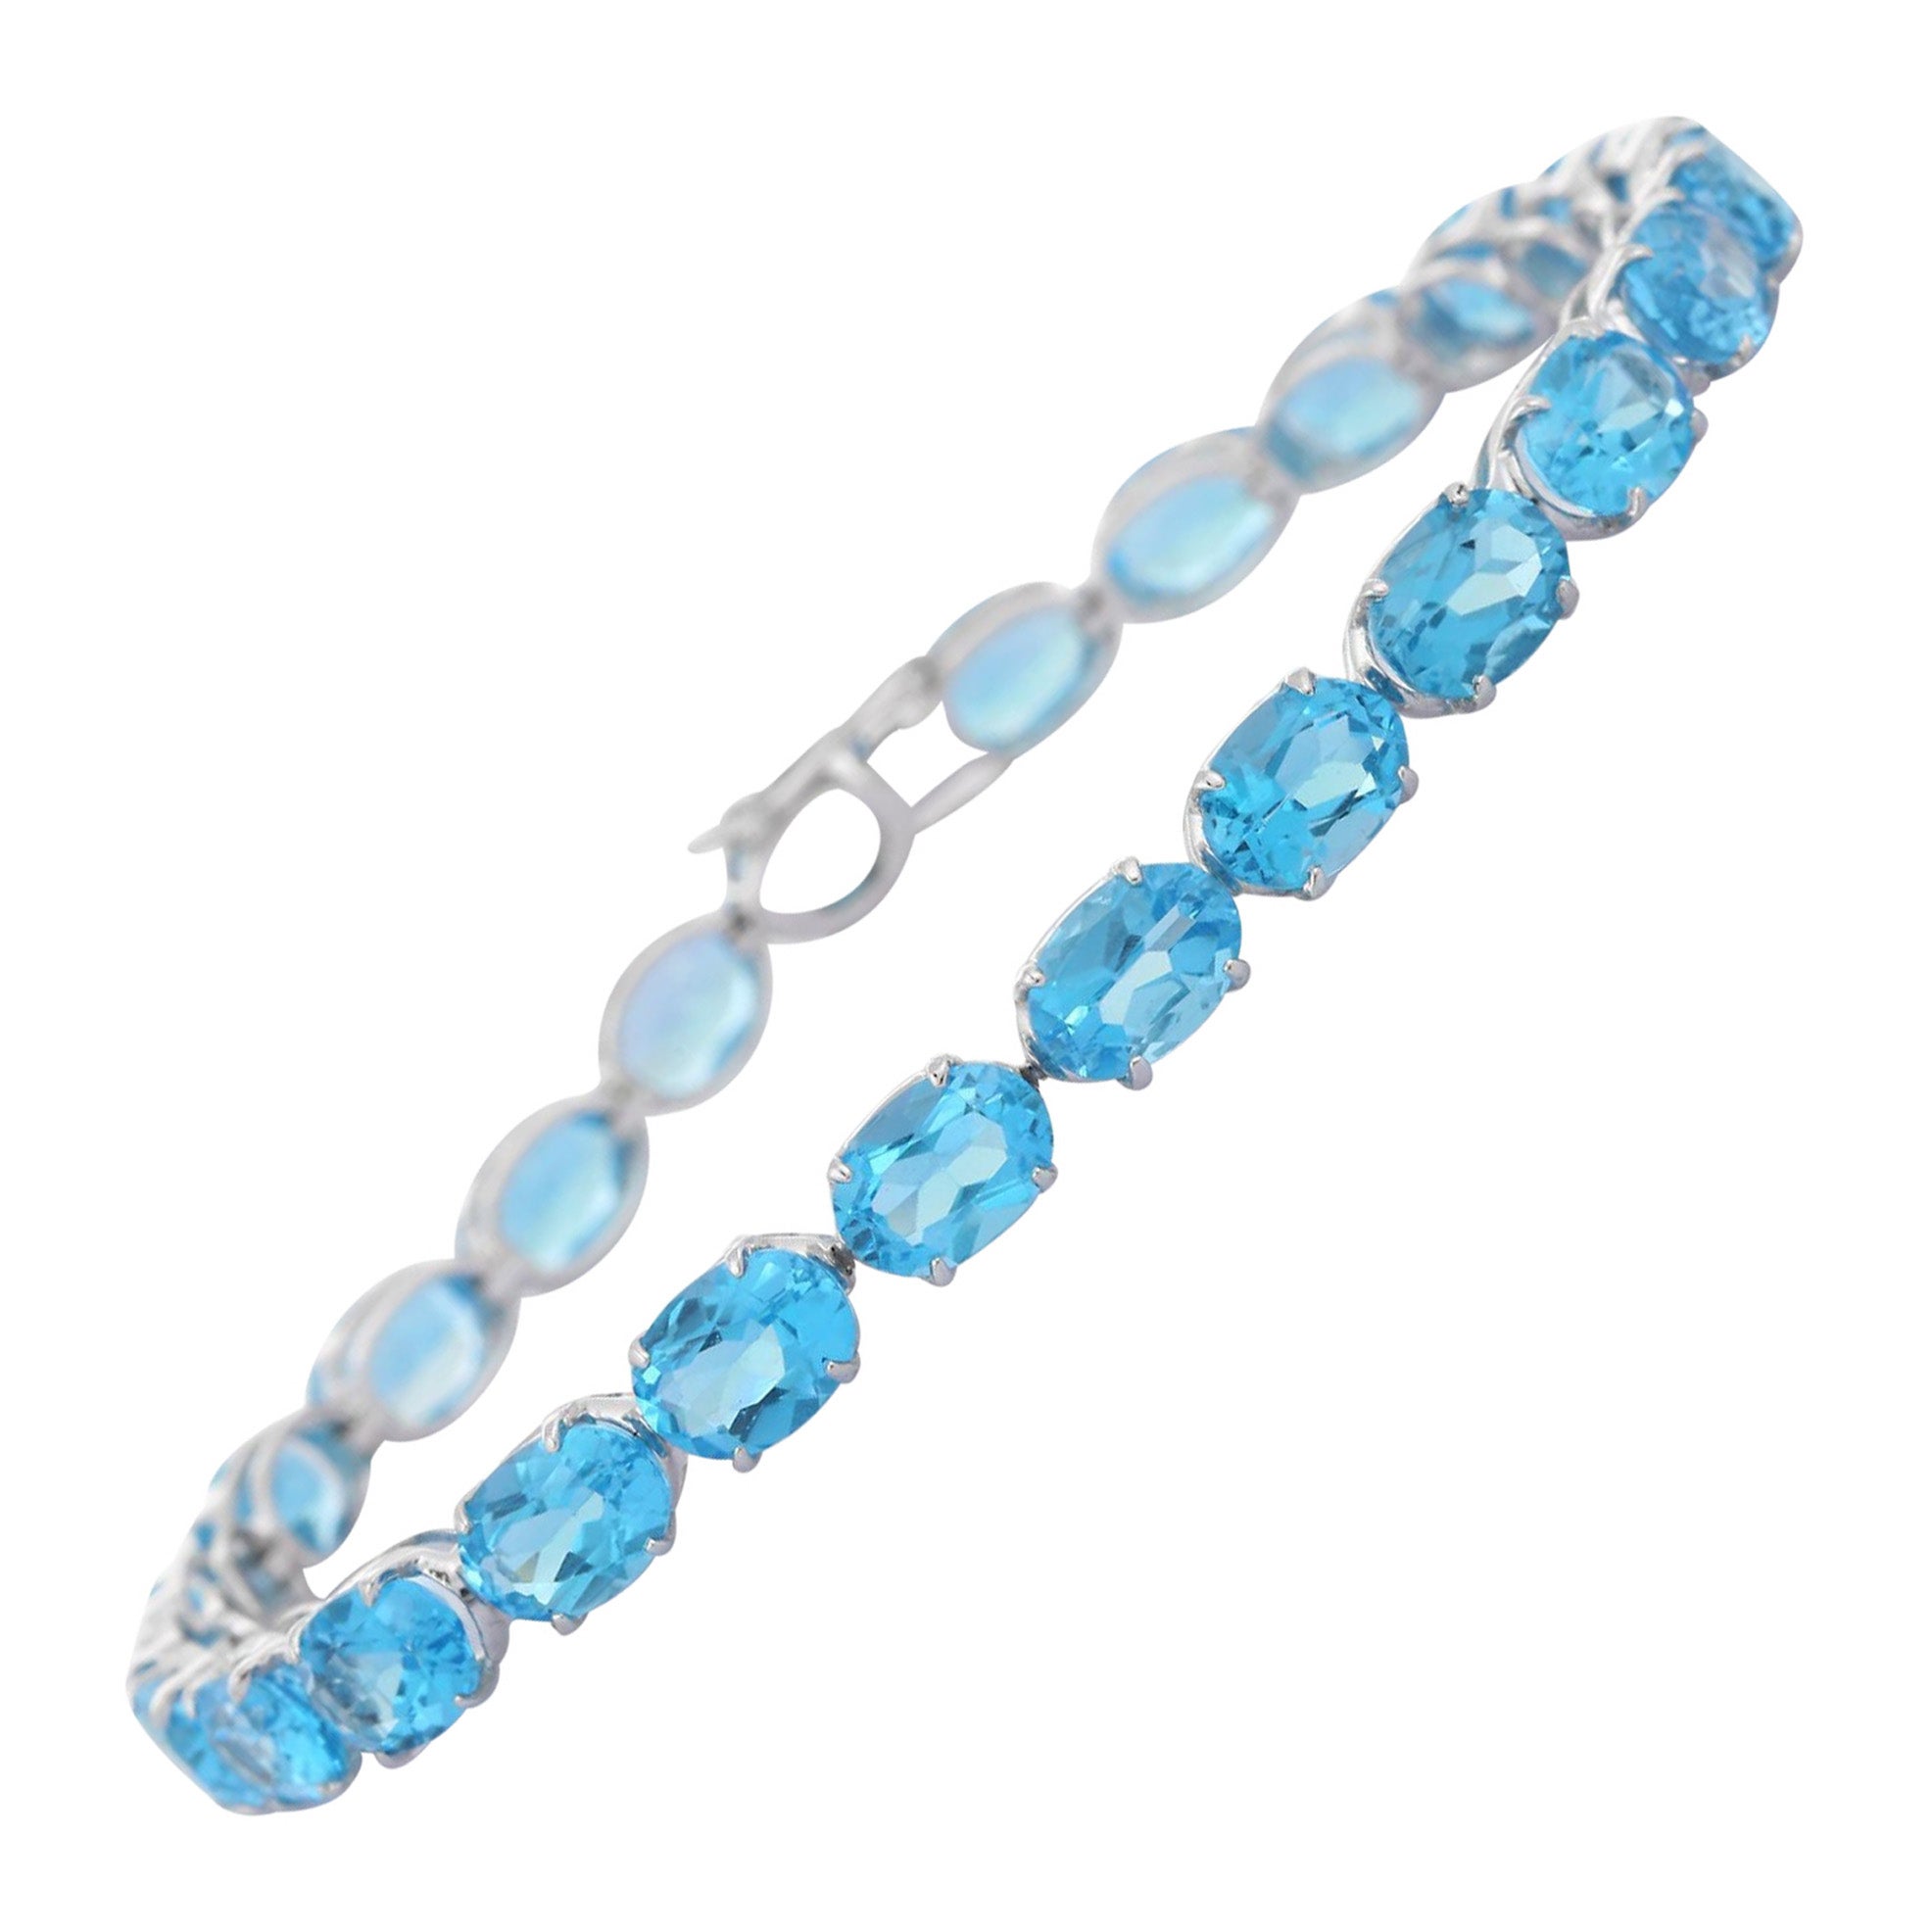 9ct white gold 9x7mm oval blue topaz bracelet - Jewellery from Mr Harold  and Son UK